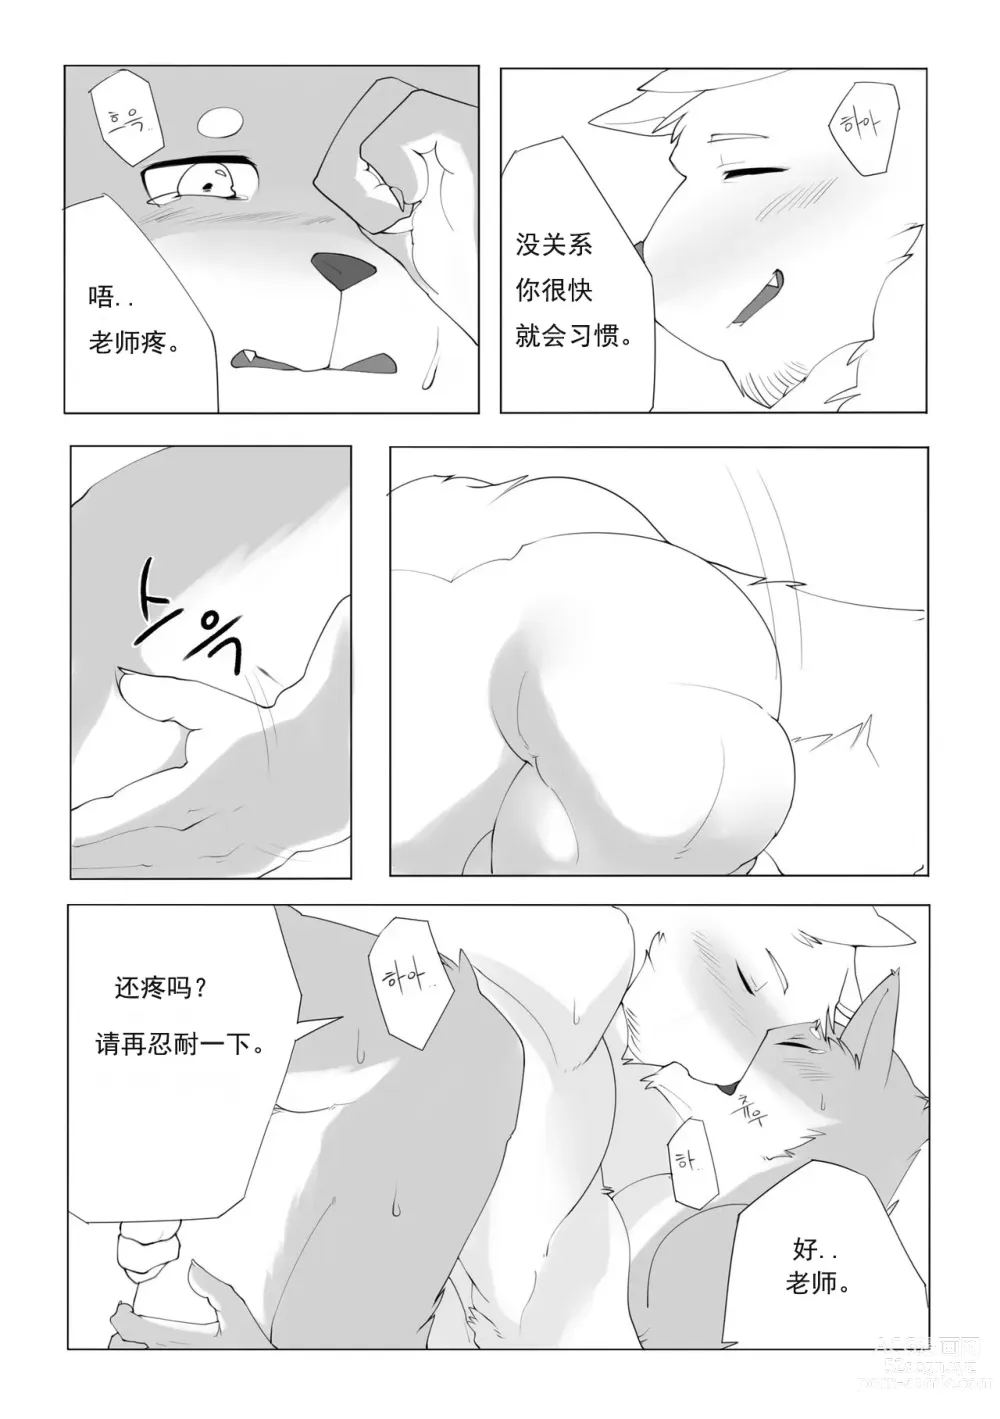 Page 26 of doujinshi 单恋 （工口译制）